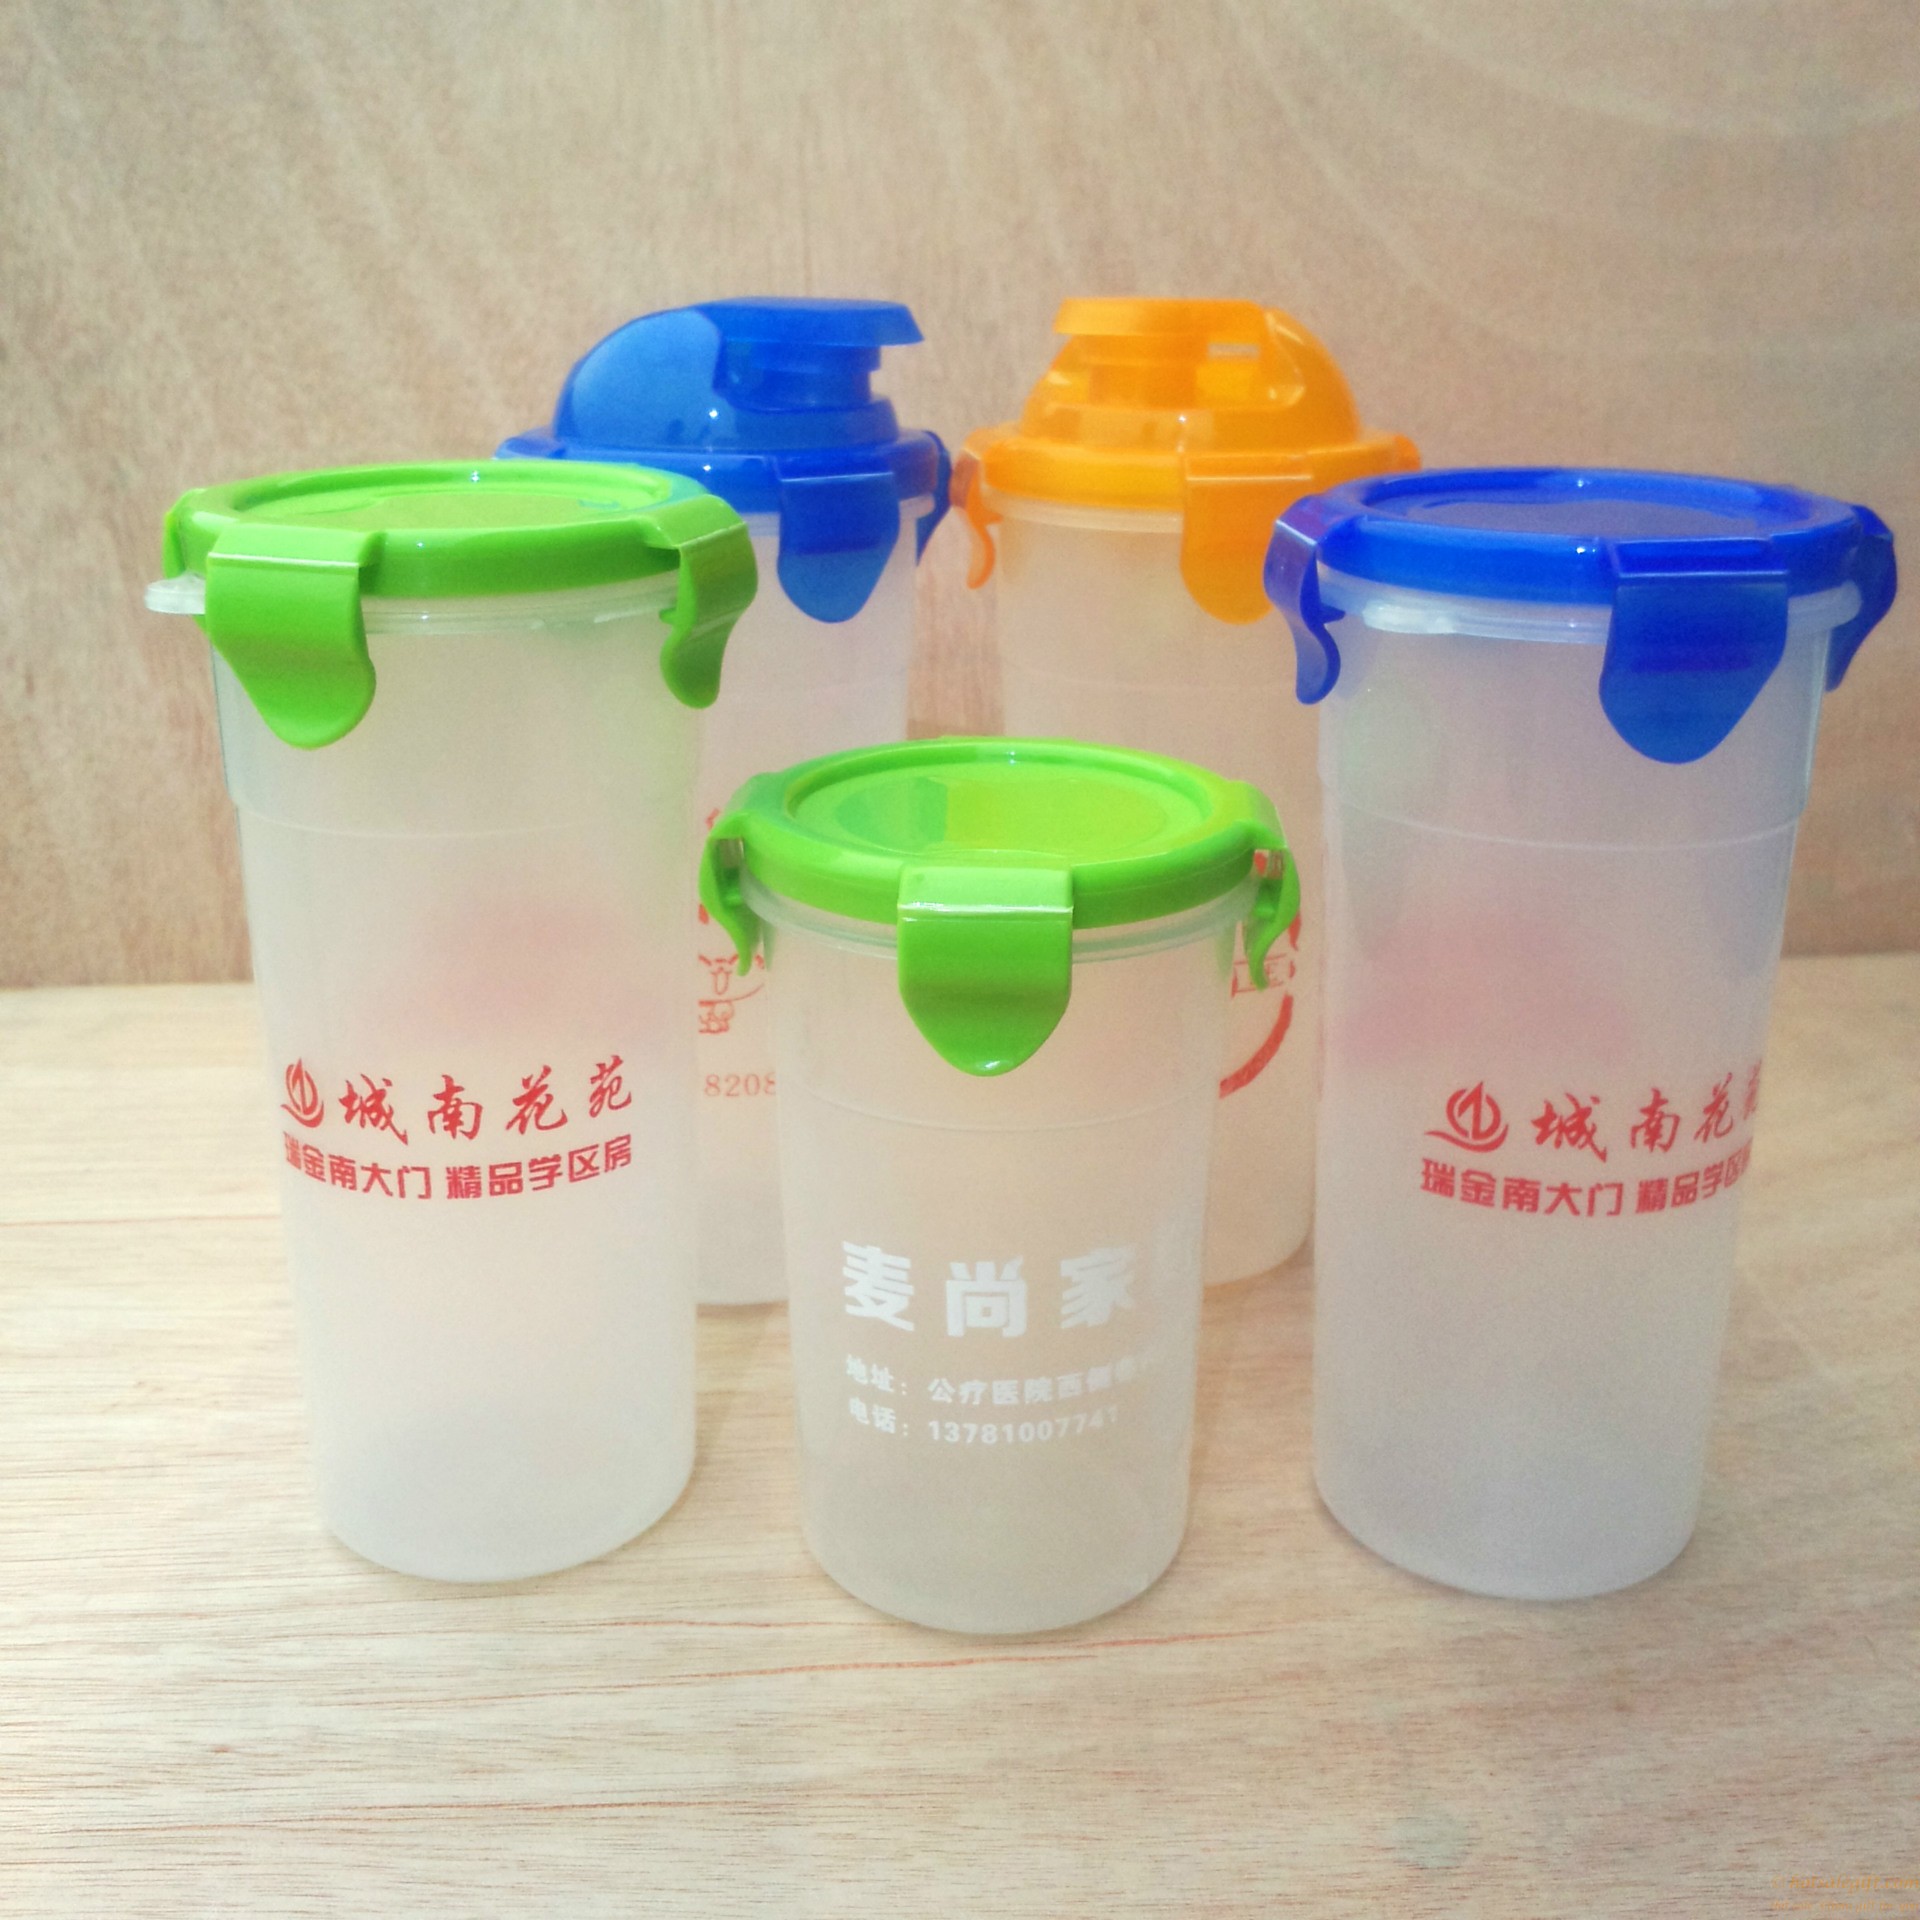 hotsalegift double plastic cups creative promotional gifts advertising water bottle printed logo